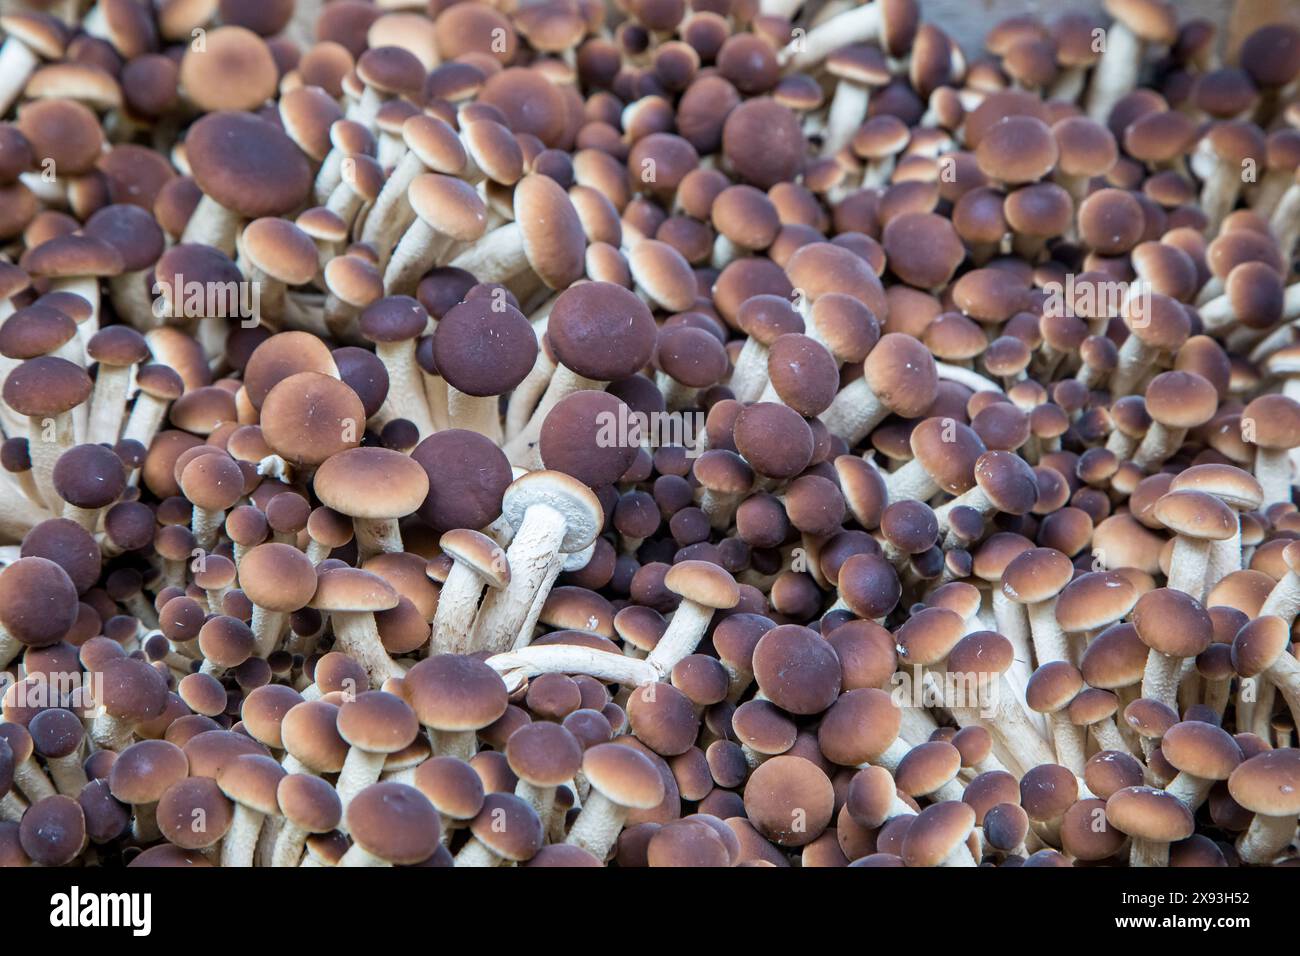 Close-up of clusters of brown and white beech mushrooms. Stock Photo